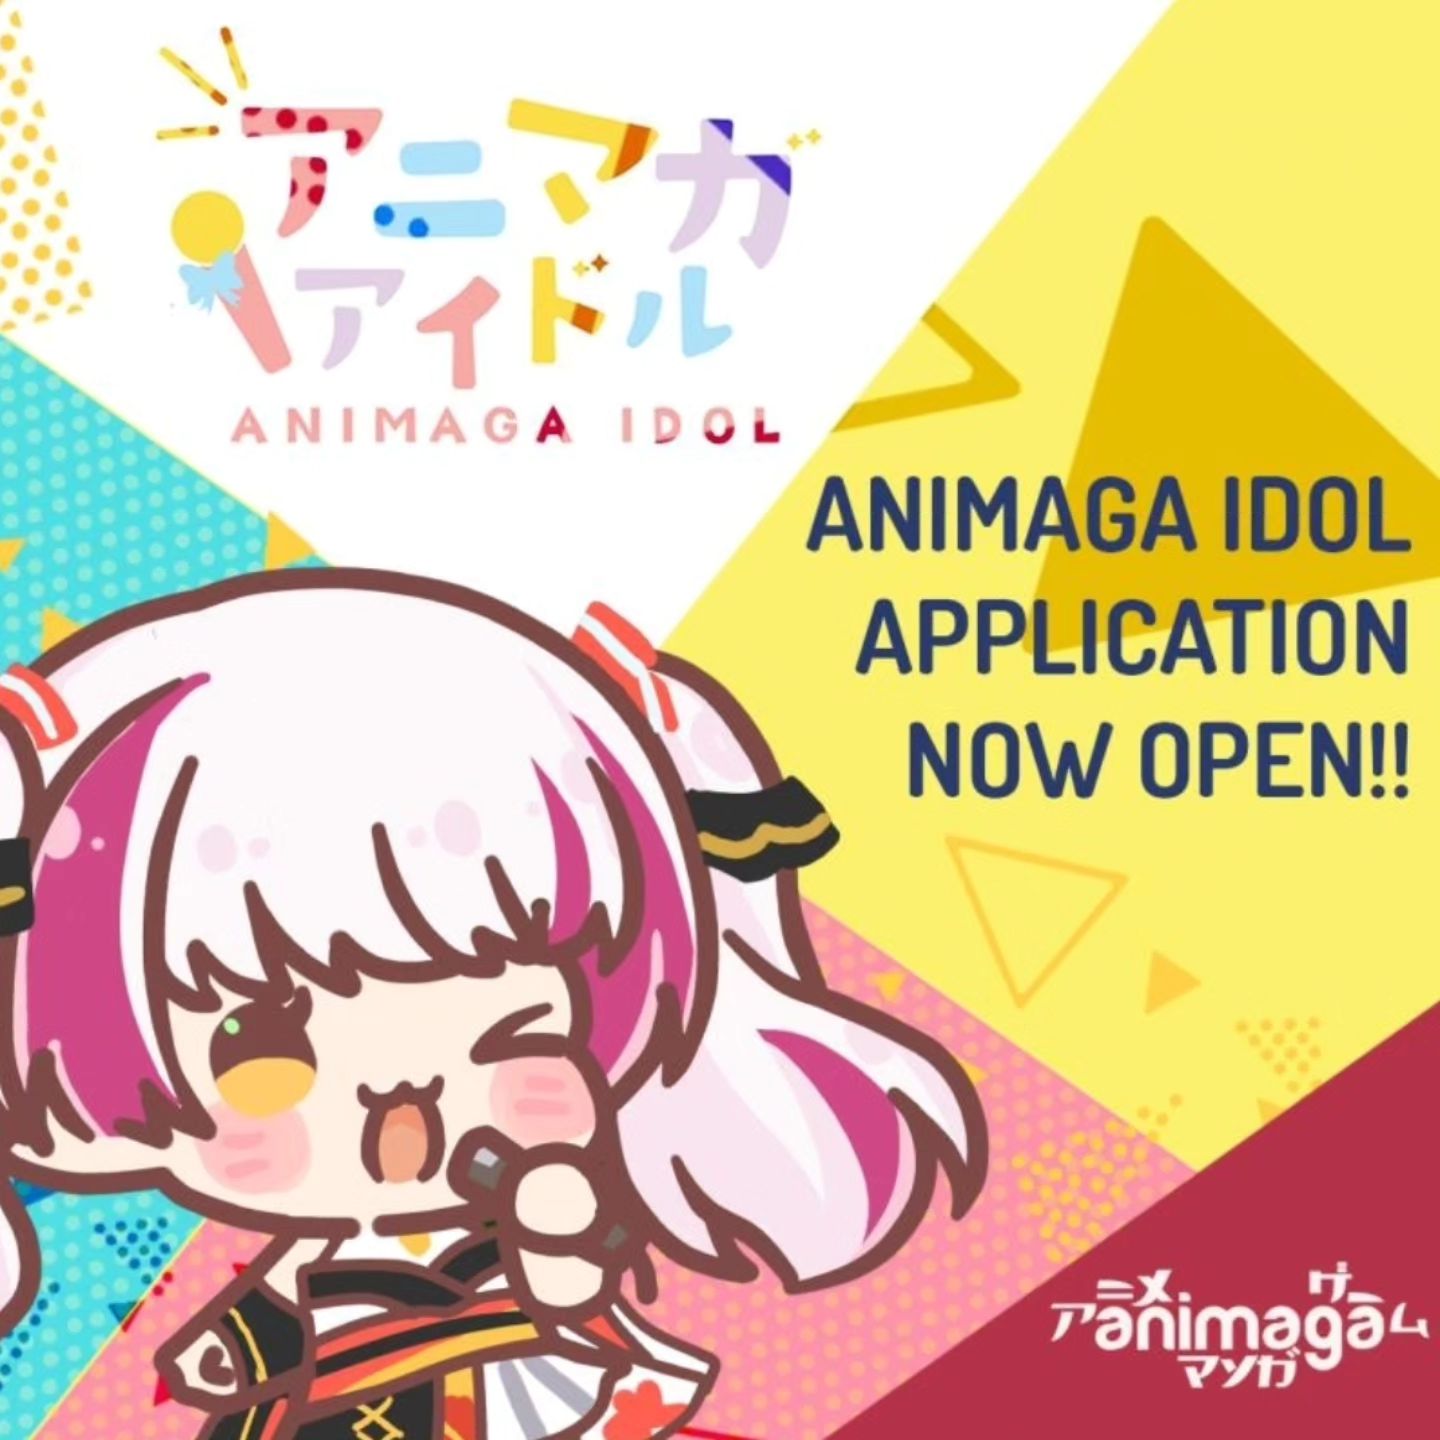 I'm so excited to announce that I'll be one of the judges at the upcoming Animaga Idol! Applications are still open & I'd love to see you all perform! 💜 So get them in while you can! This is going to be so much fun!
Also, yes. I absolutely had to use the jojo pose. That anime is taking over my life right now hahaha.

Thank you so much @animagaexpo  for the opportunity! Let's bring so much love and fun to the idol community down here in Melbourne.
If you'd like to sign up, the link will be in my bio & the Animaga website! 💜

📸 @chan_darius / edit by me.

#animaga #animaga2023 #animagaidol #internationalidols #kaigaiidol #idolgroup #westernidols #cosplay #cosplayidols #海外アイドル #アイドル #netidols